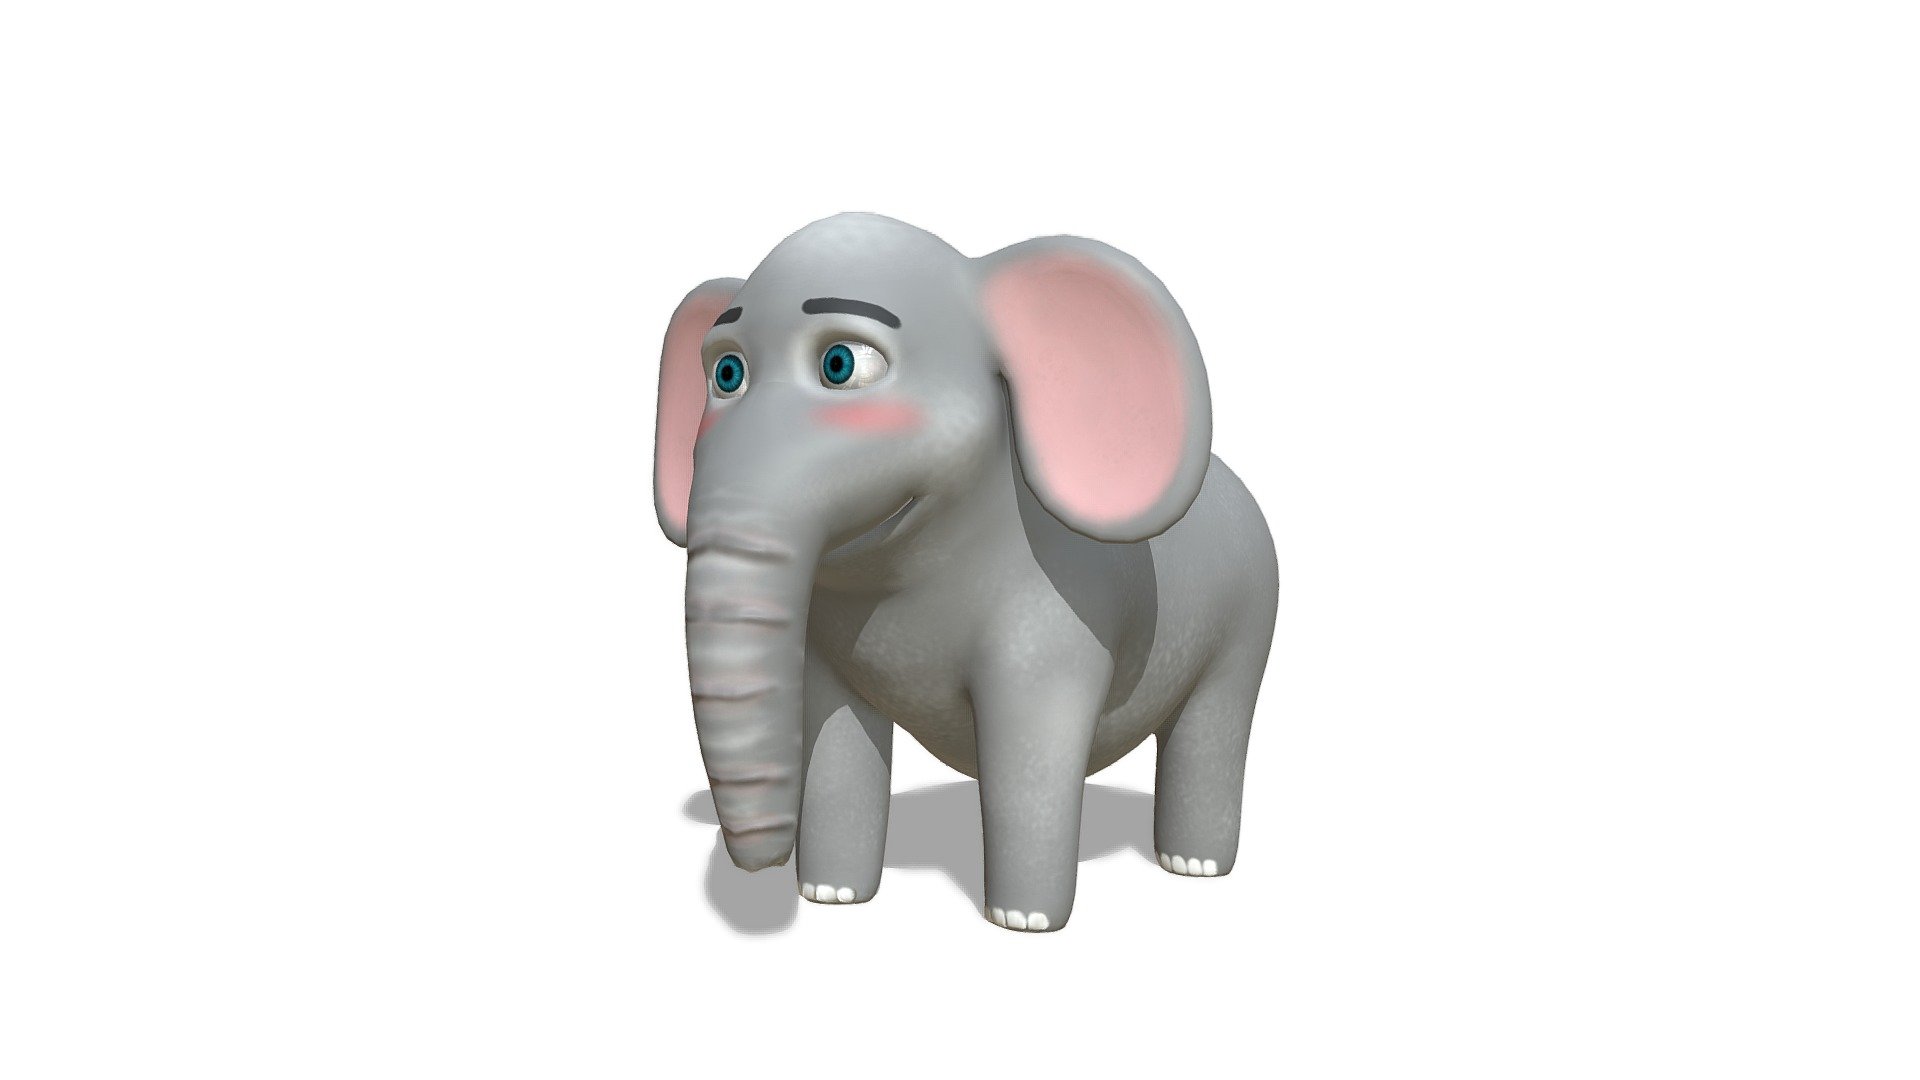 Cartoon Elephant 3D Model
Can you check this CGTrader Link - Cartoon Elephant - 3D model by Onur3d (@onurgunduz) 3d model